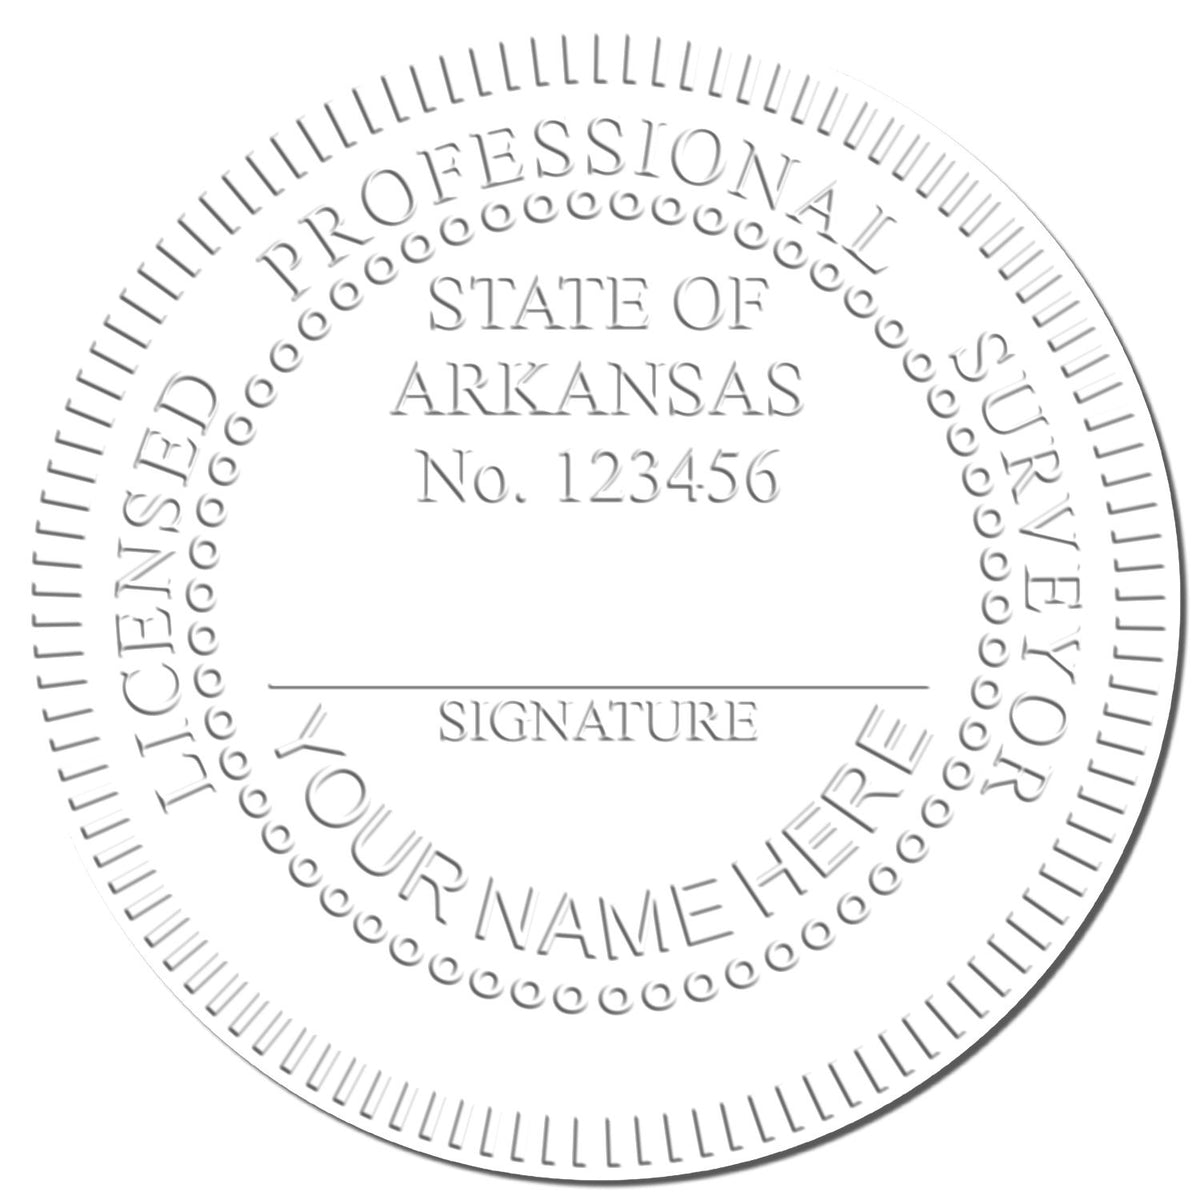 This paper is stamped with a sample imprint of the Long Reach Arkansas Land Surveyor Seal, signifying its quality and reliability.